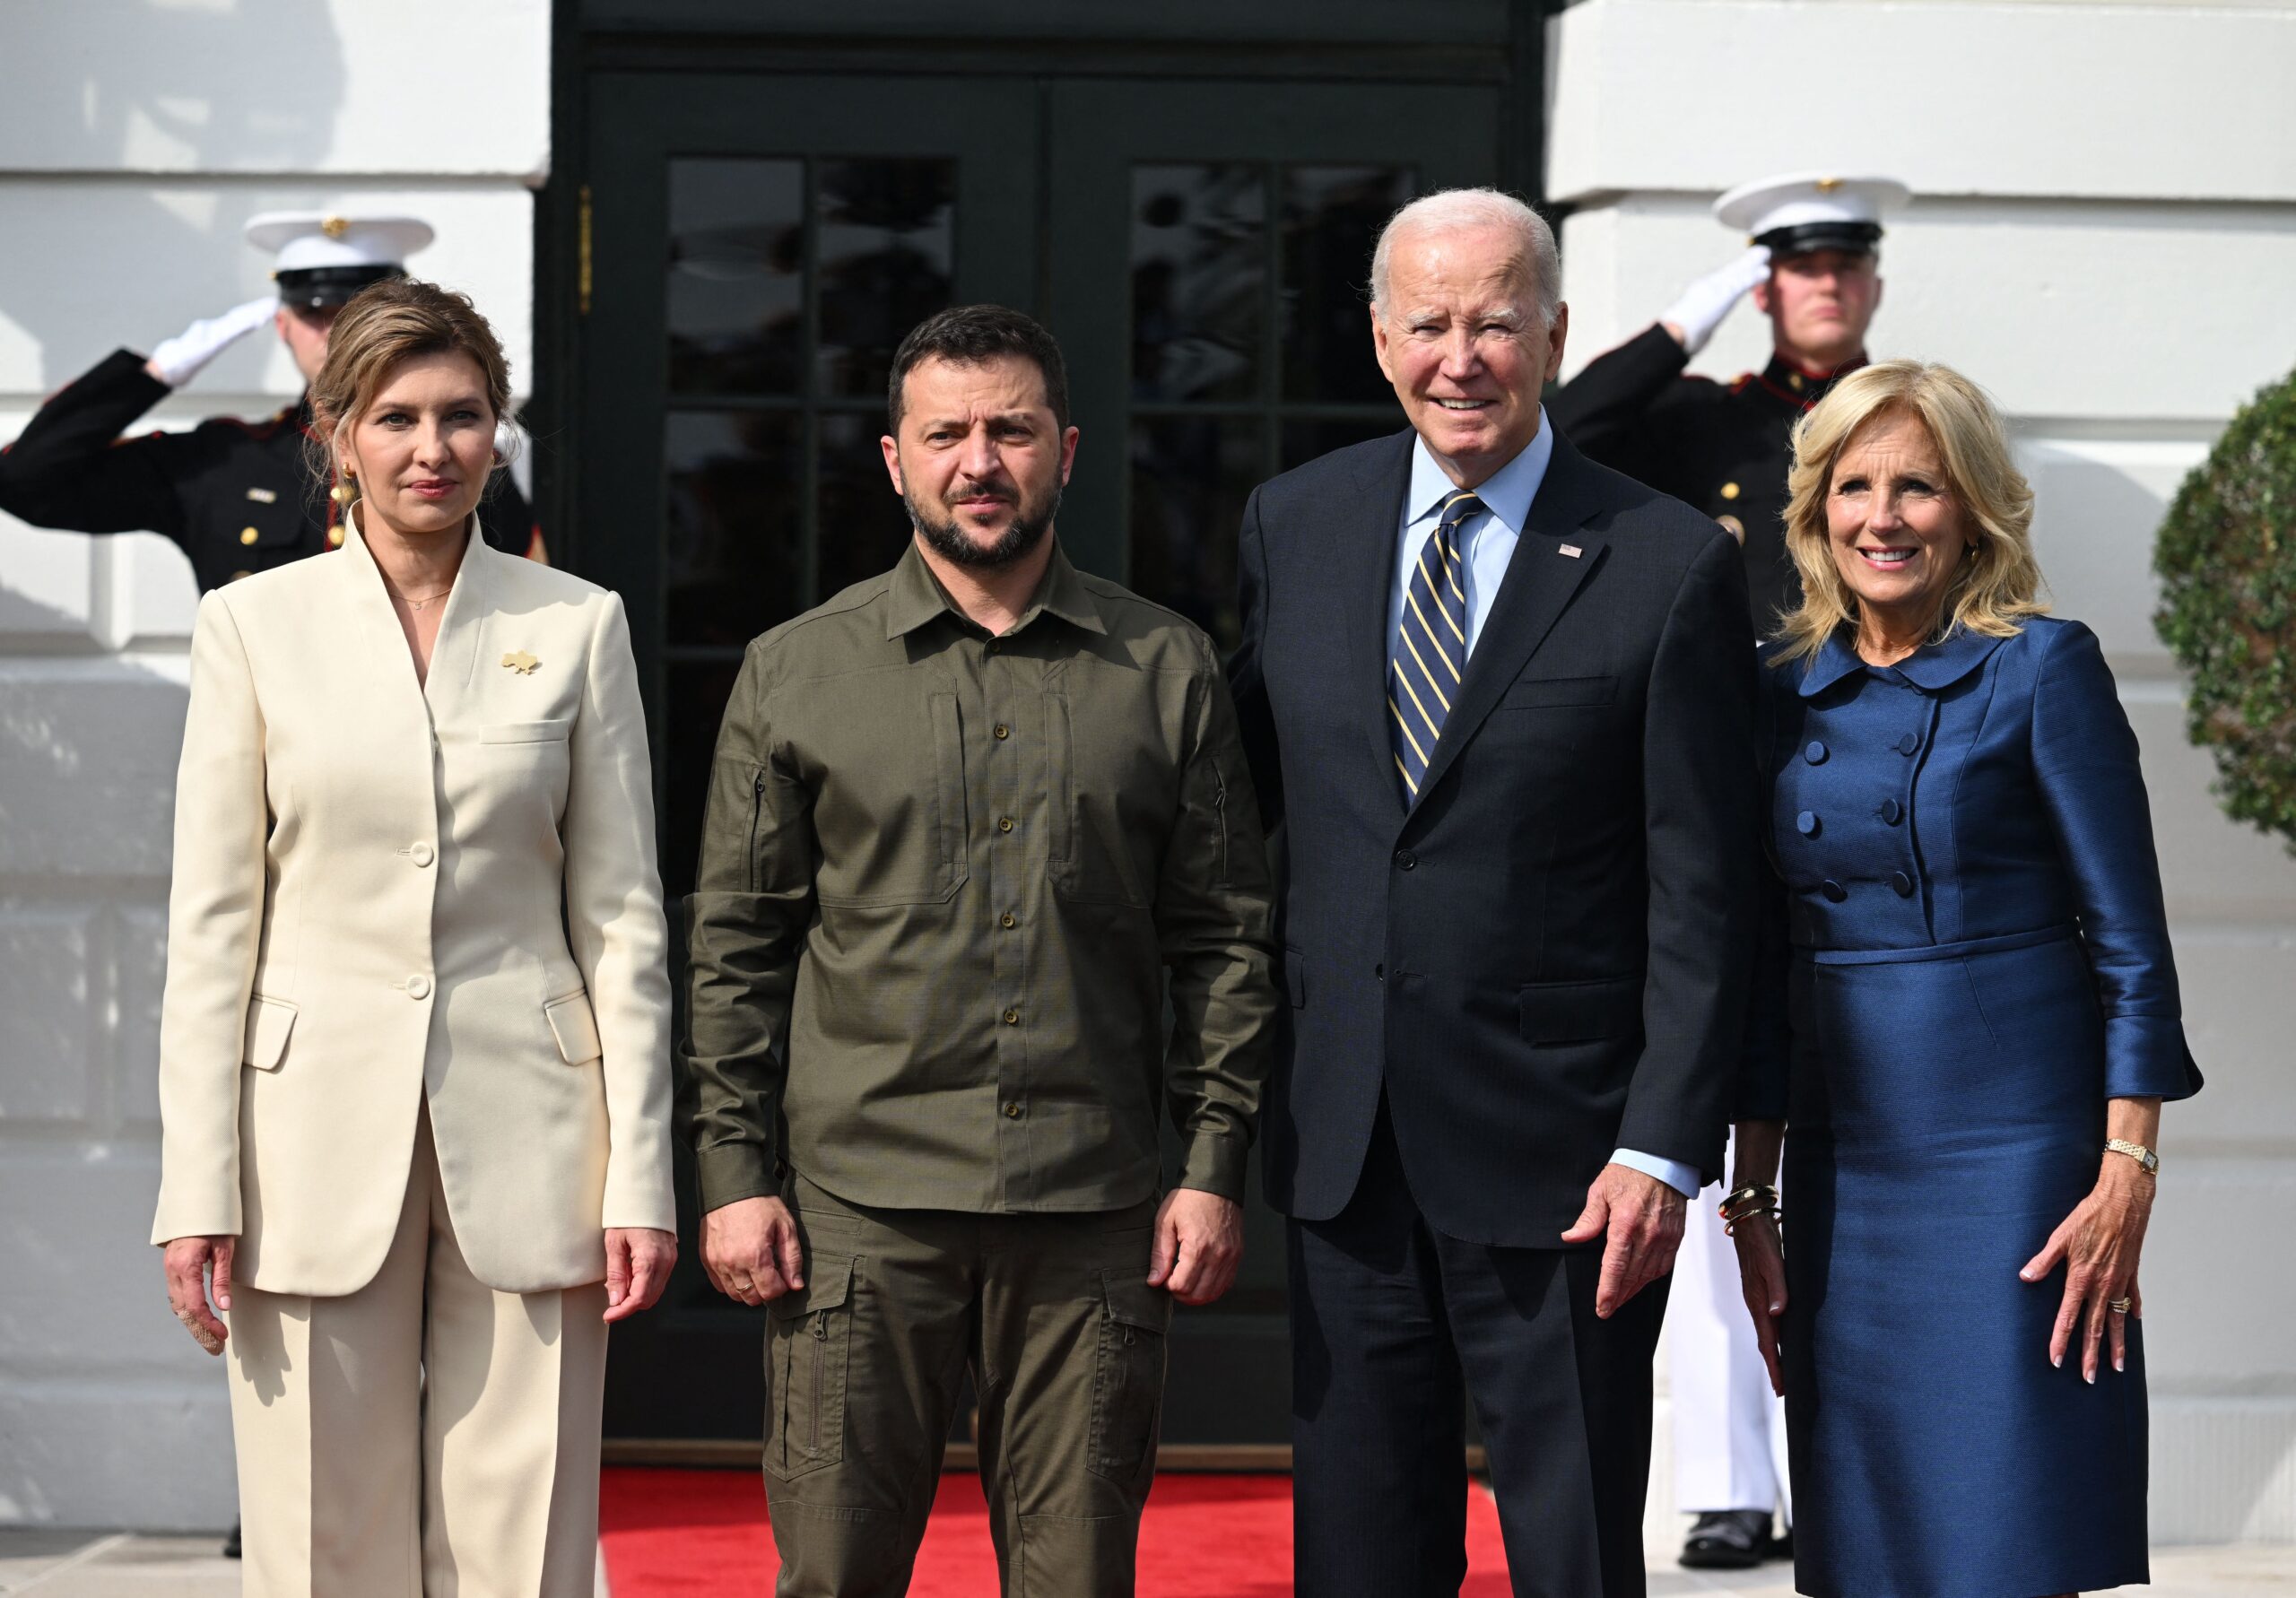 U.S. President Joe Biden and First Lady Jill Biden welcome Ukrainian President Volodymyr Zelensky and First Lady Olena Zelenska at the South Portico of the White House in Washington, DC, on September 21, 2023. <em>Photo by SAUL LOEB/AFP via Getty Images</em>